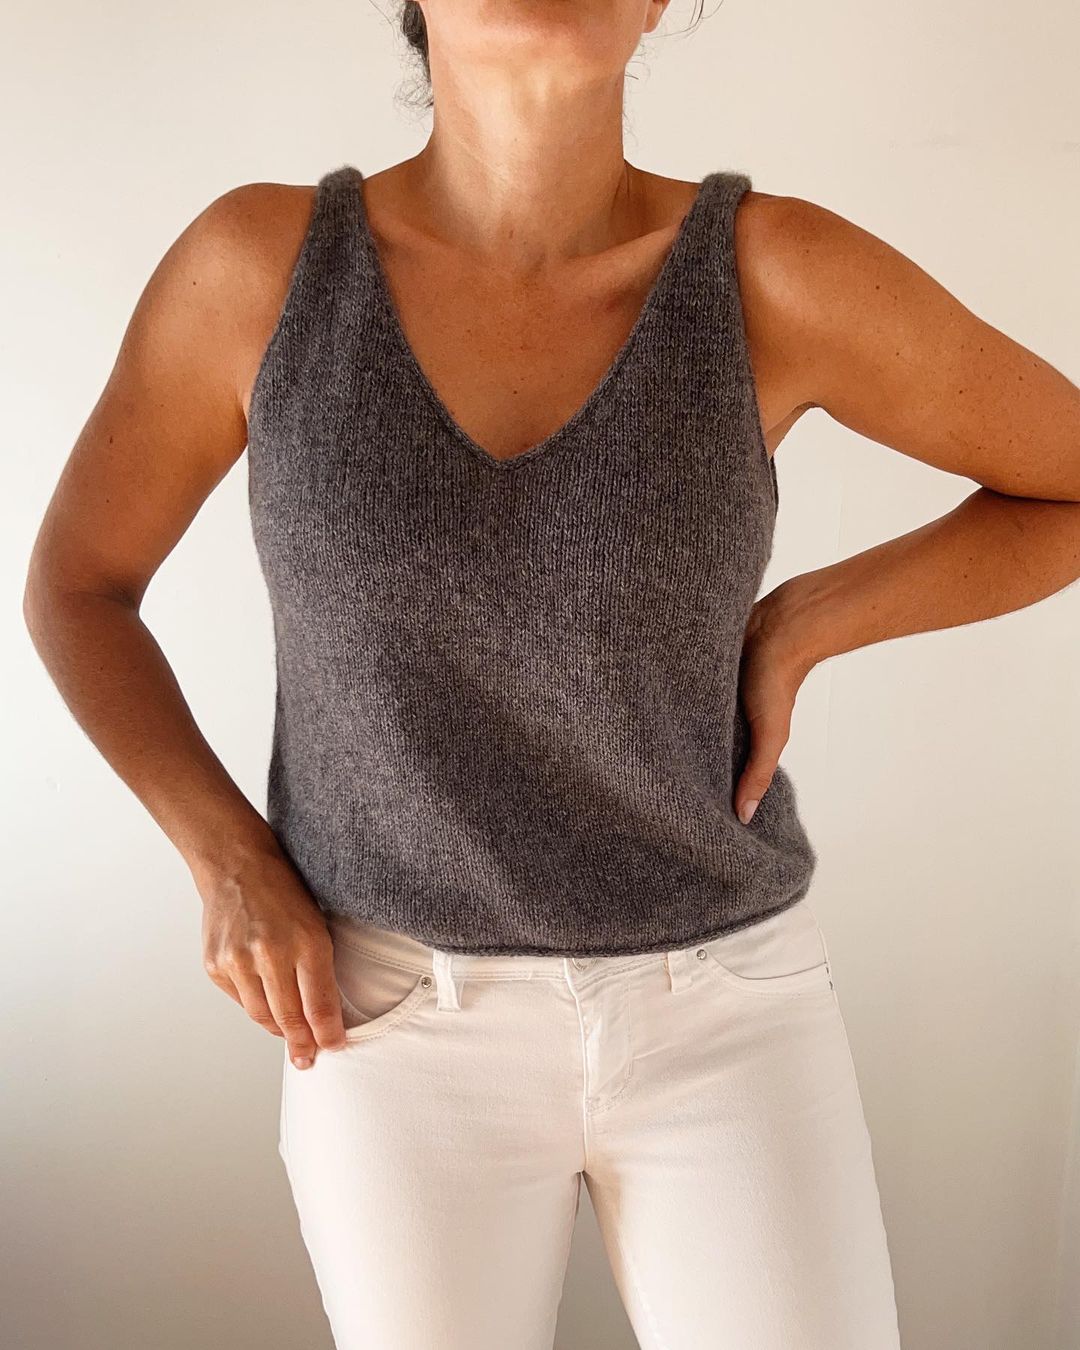 Home Camisole pattern by Caidree